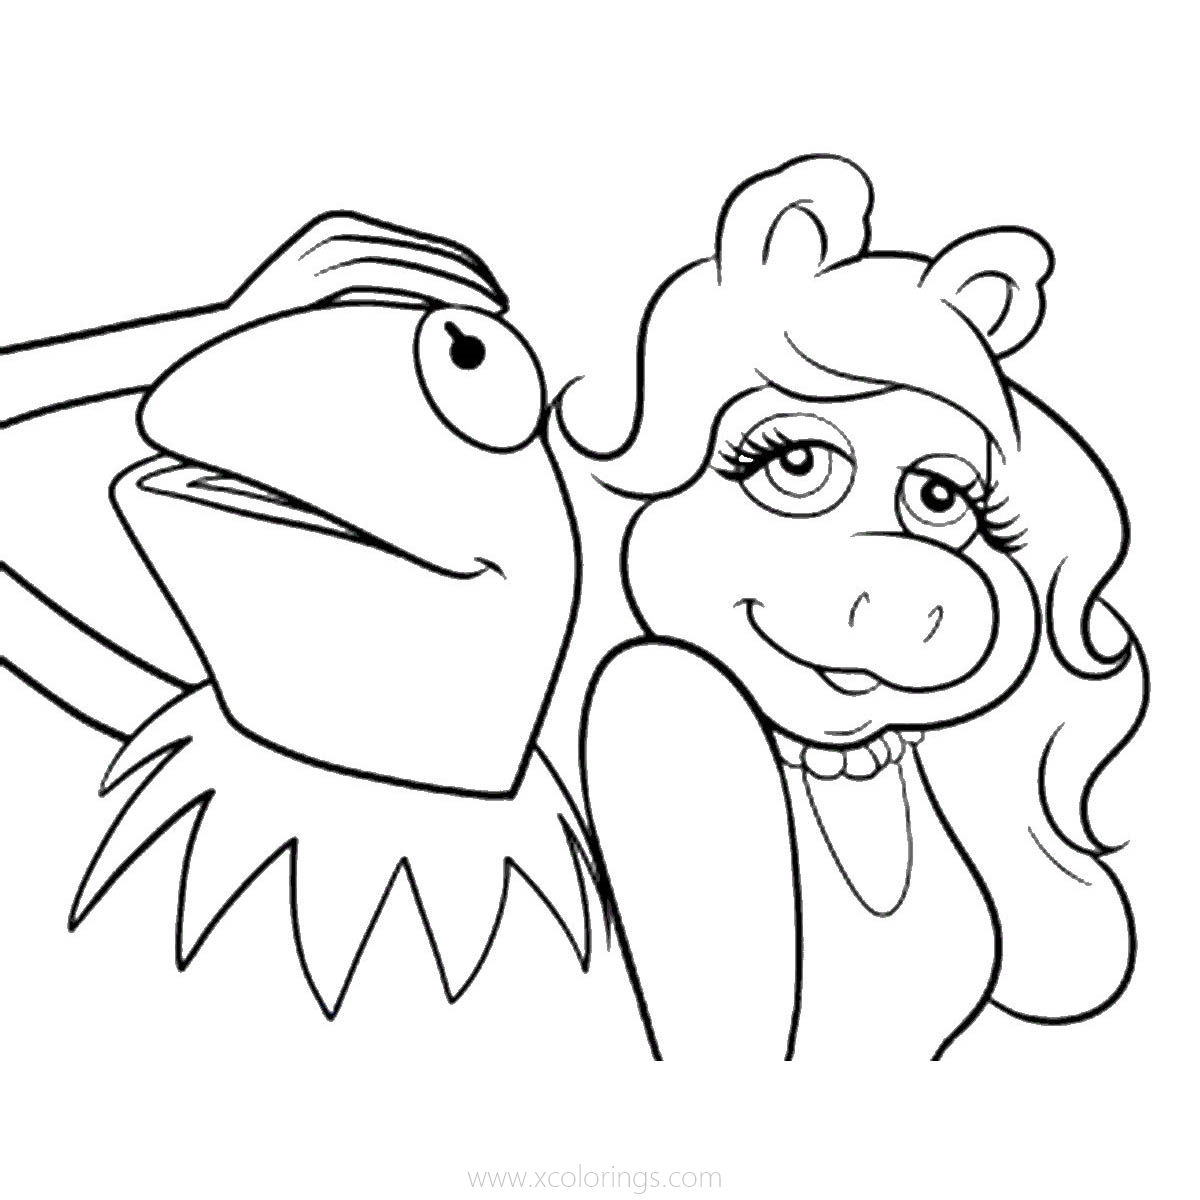 Kermit And Miss Piggy Coloring Pages